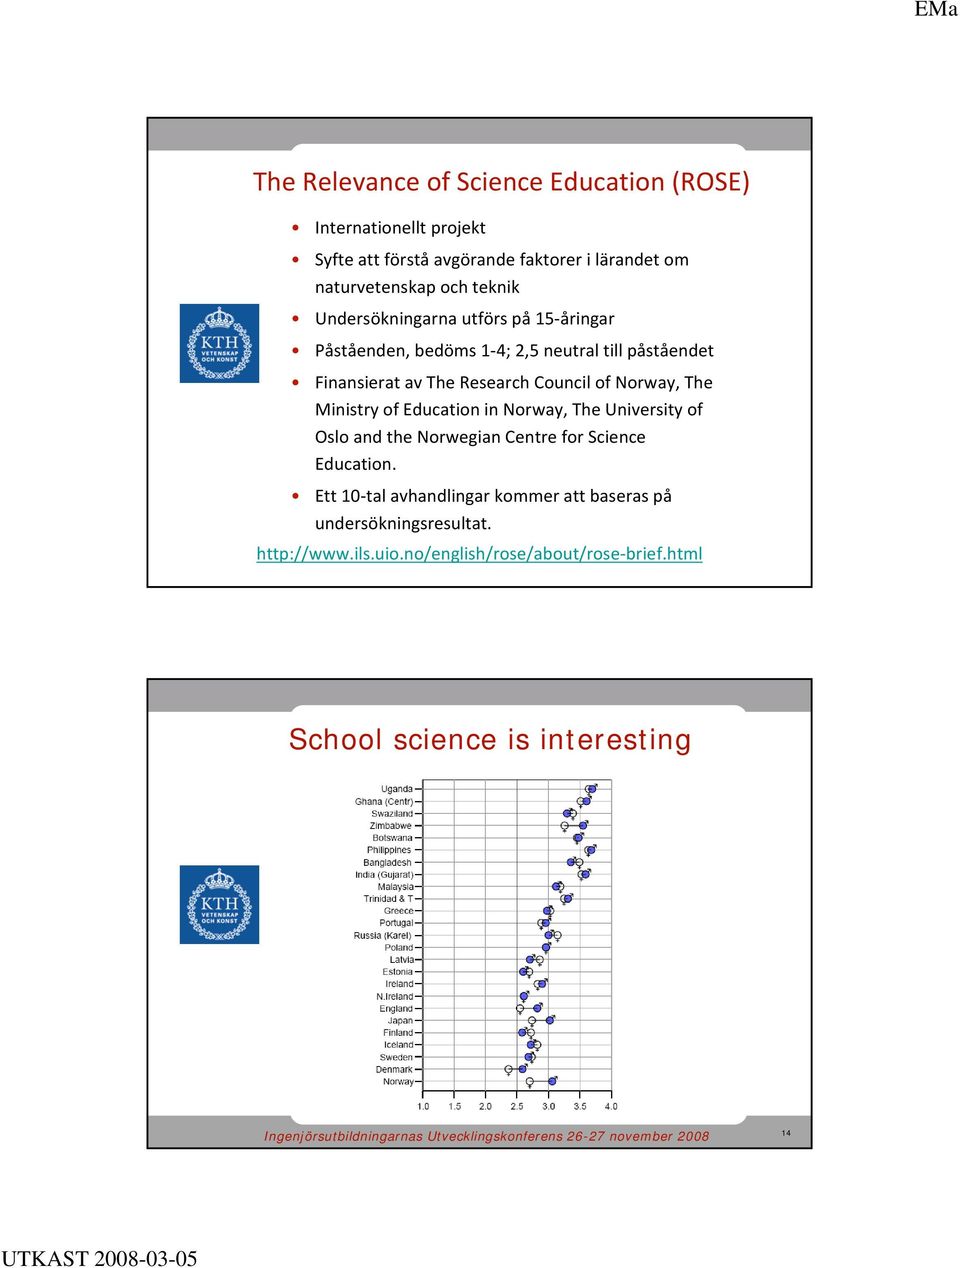 Norway, The Ministry of Education in Norway, The University of Oslo and the Norwegian Centre for Science Education.